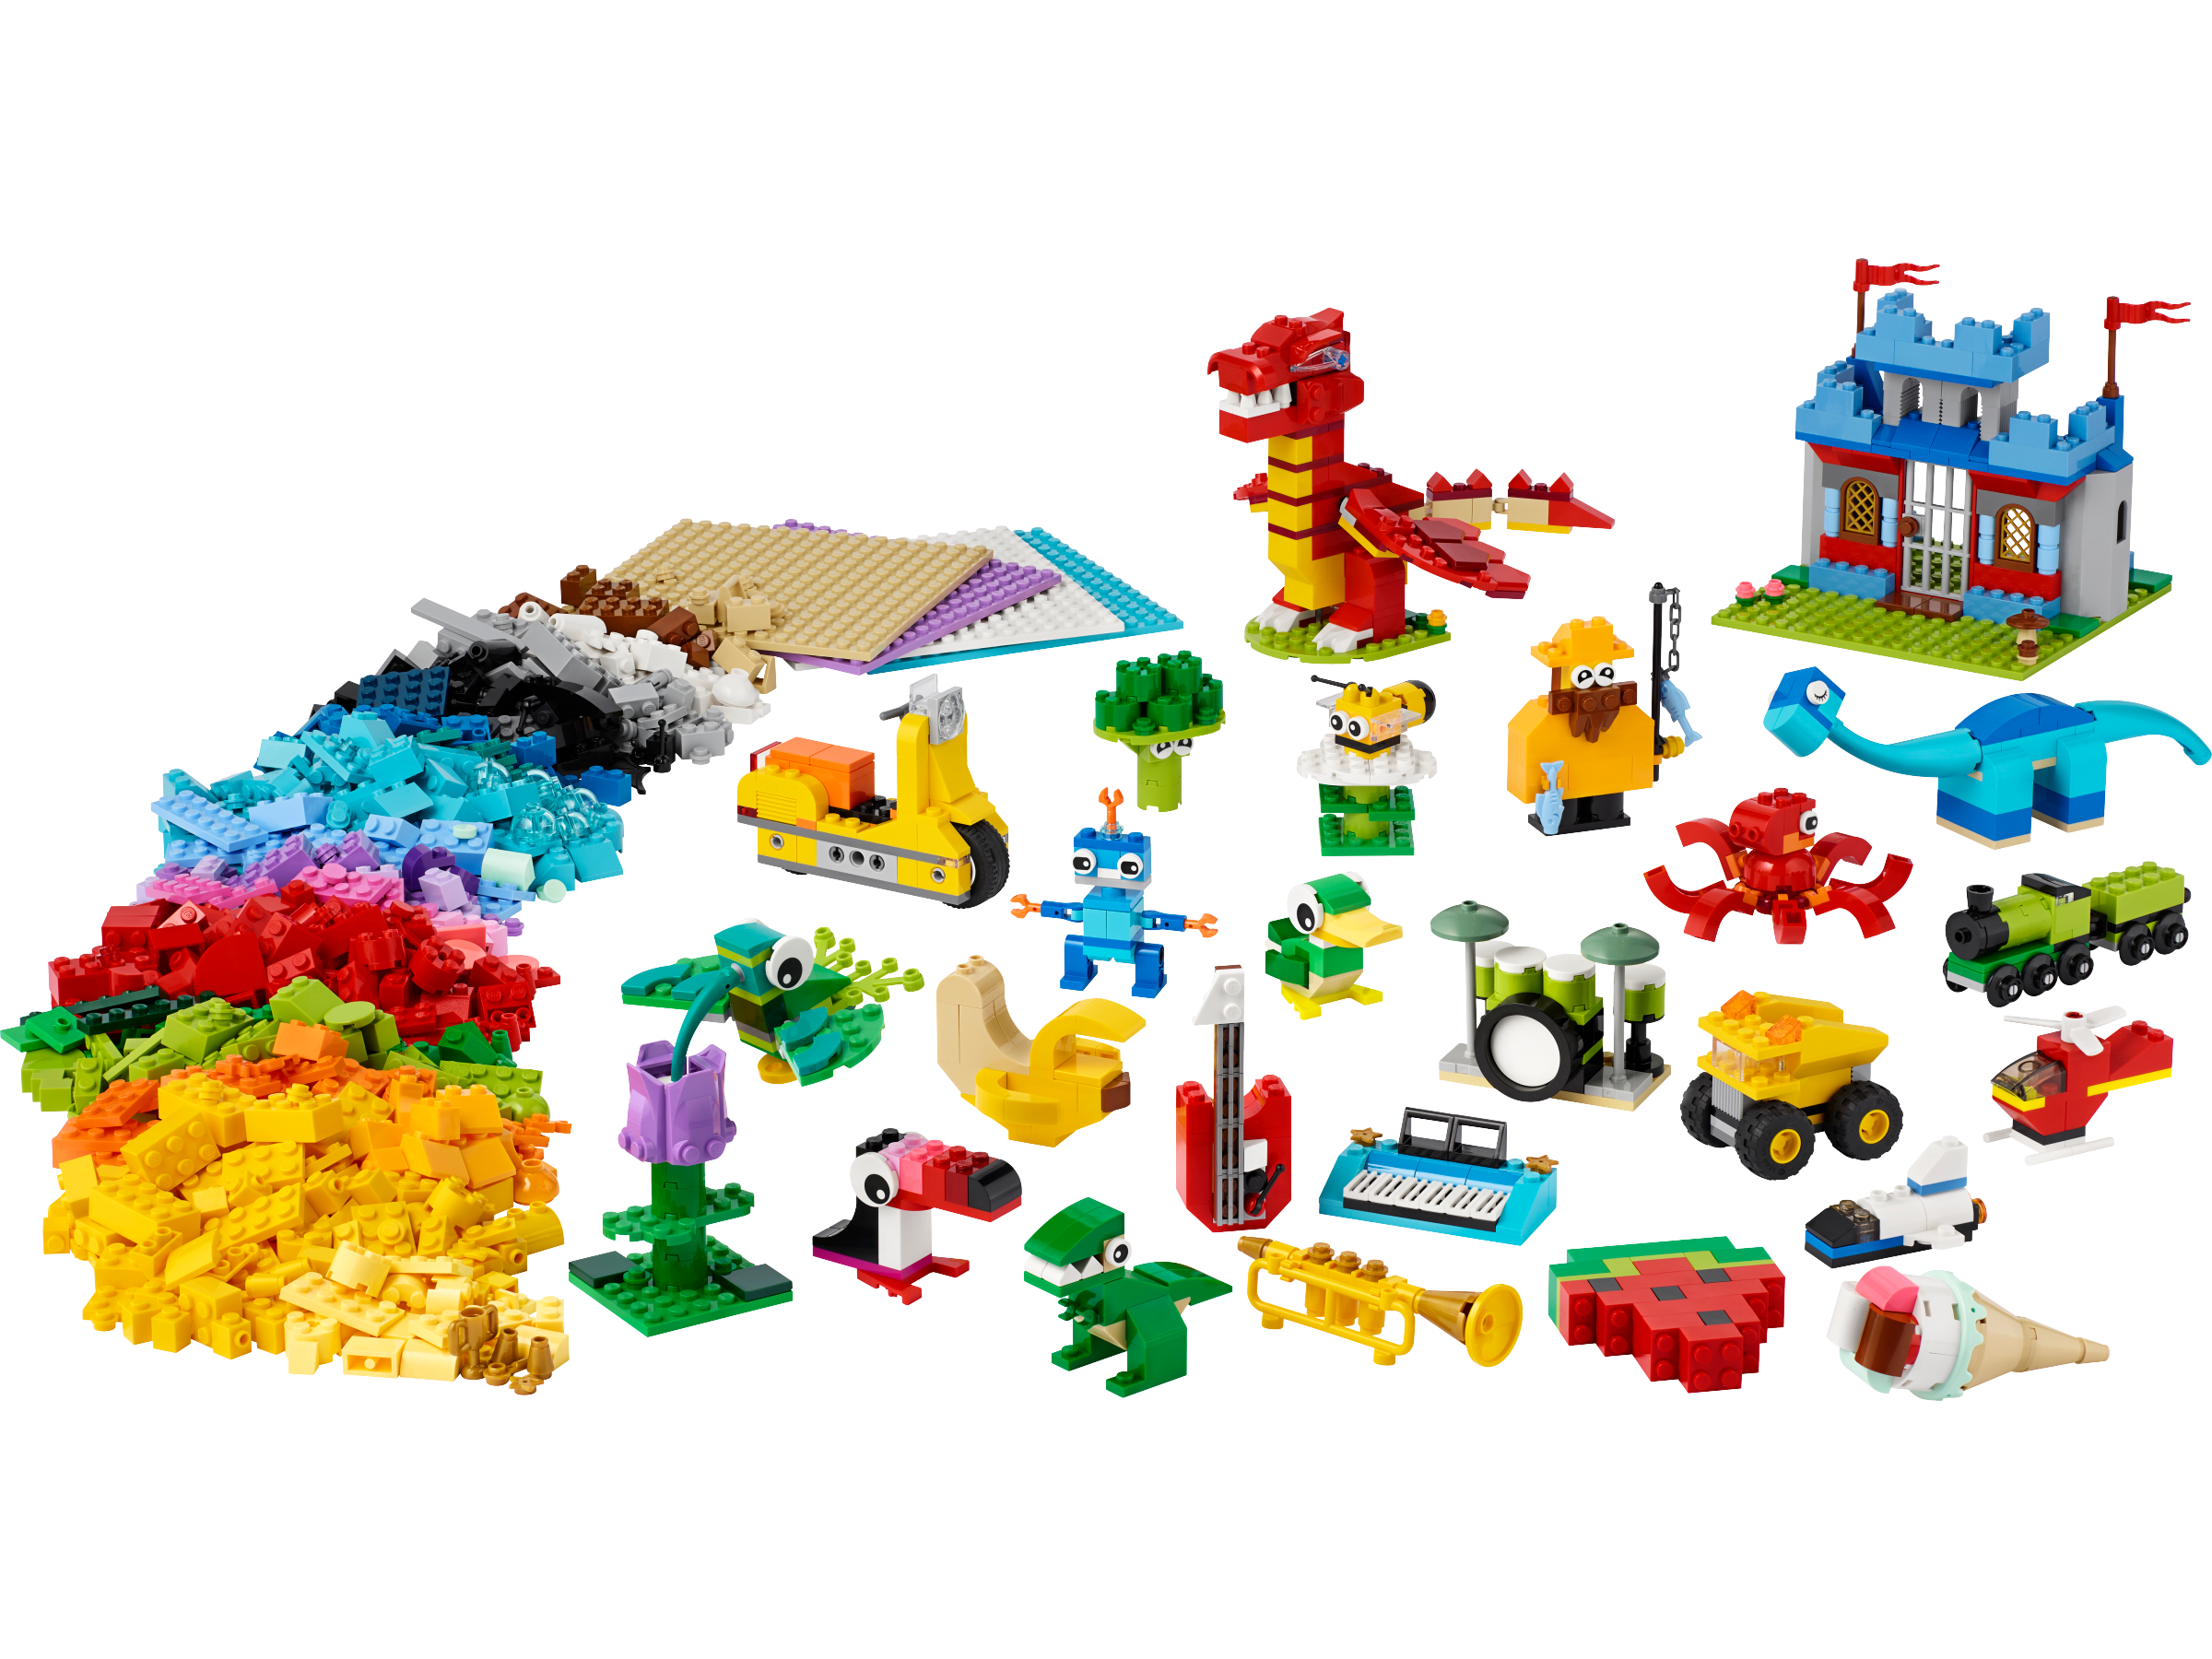 Build Together 11020 | Classic | Buy online at Official LEGO® Shop US